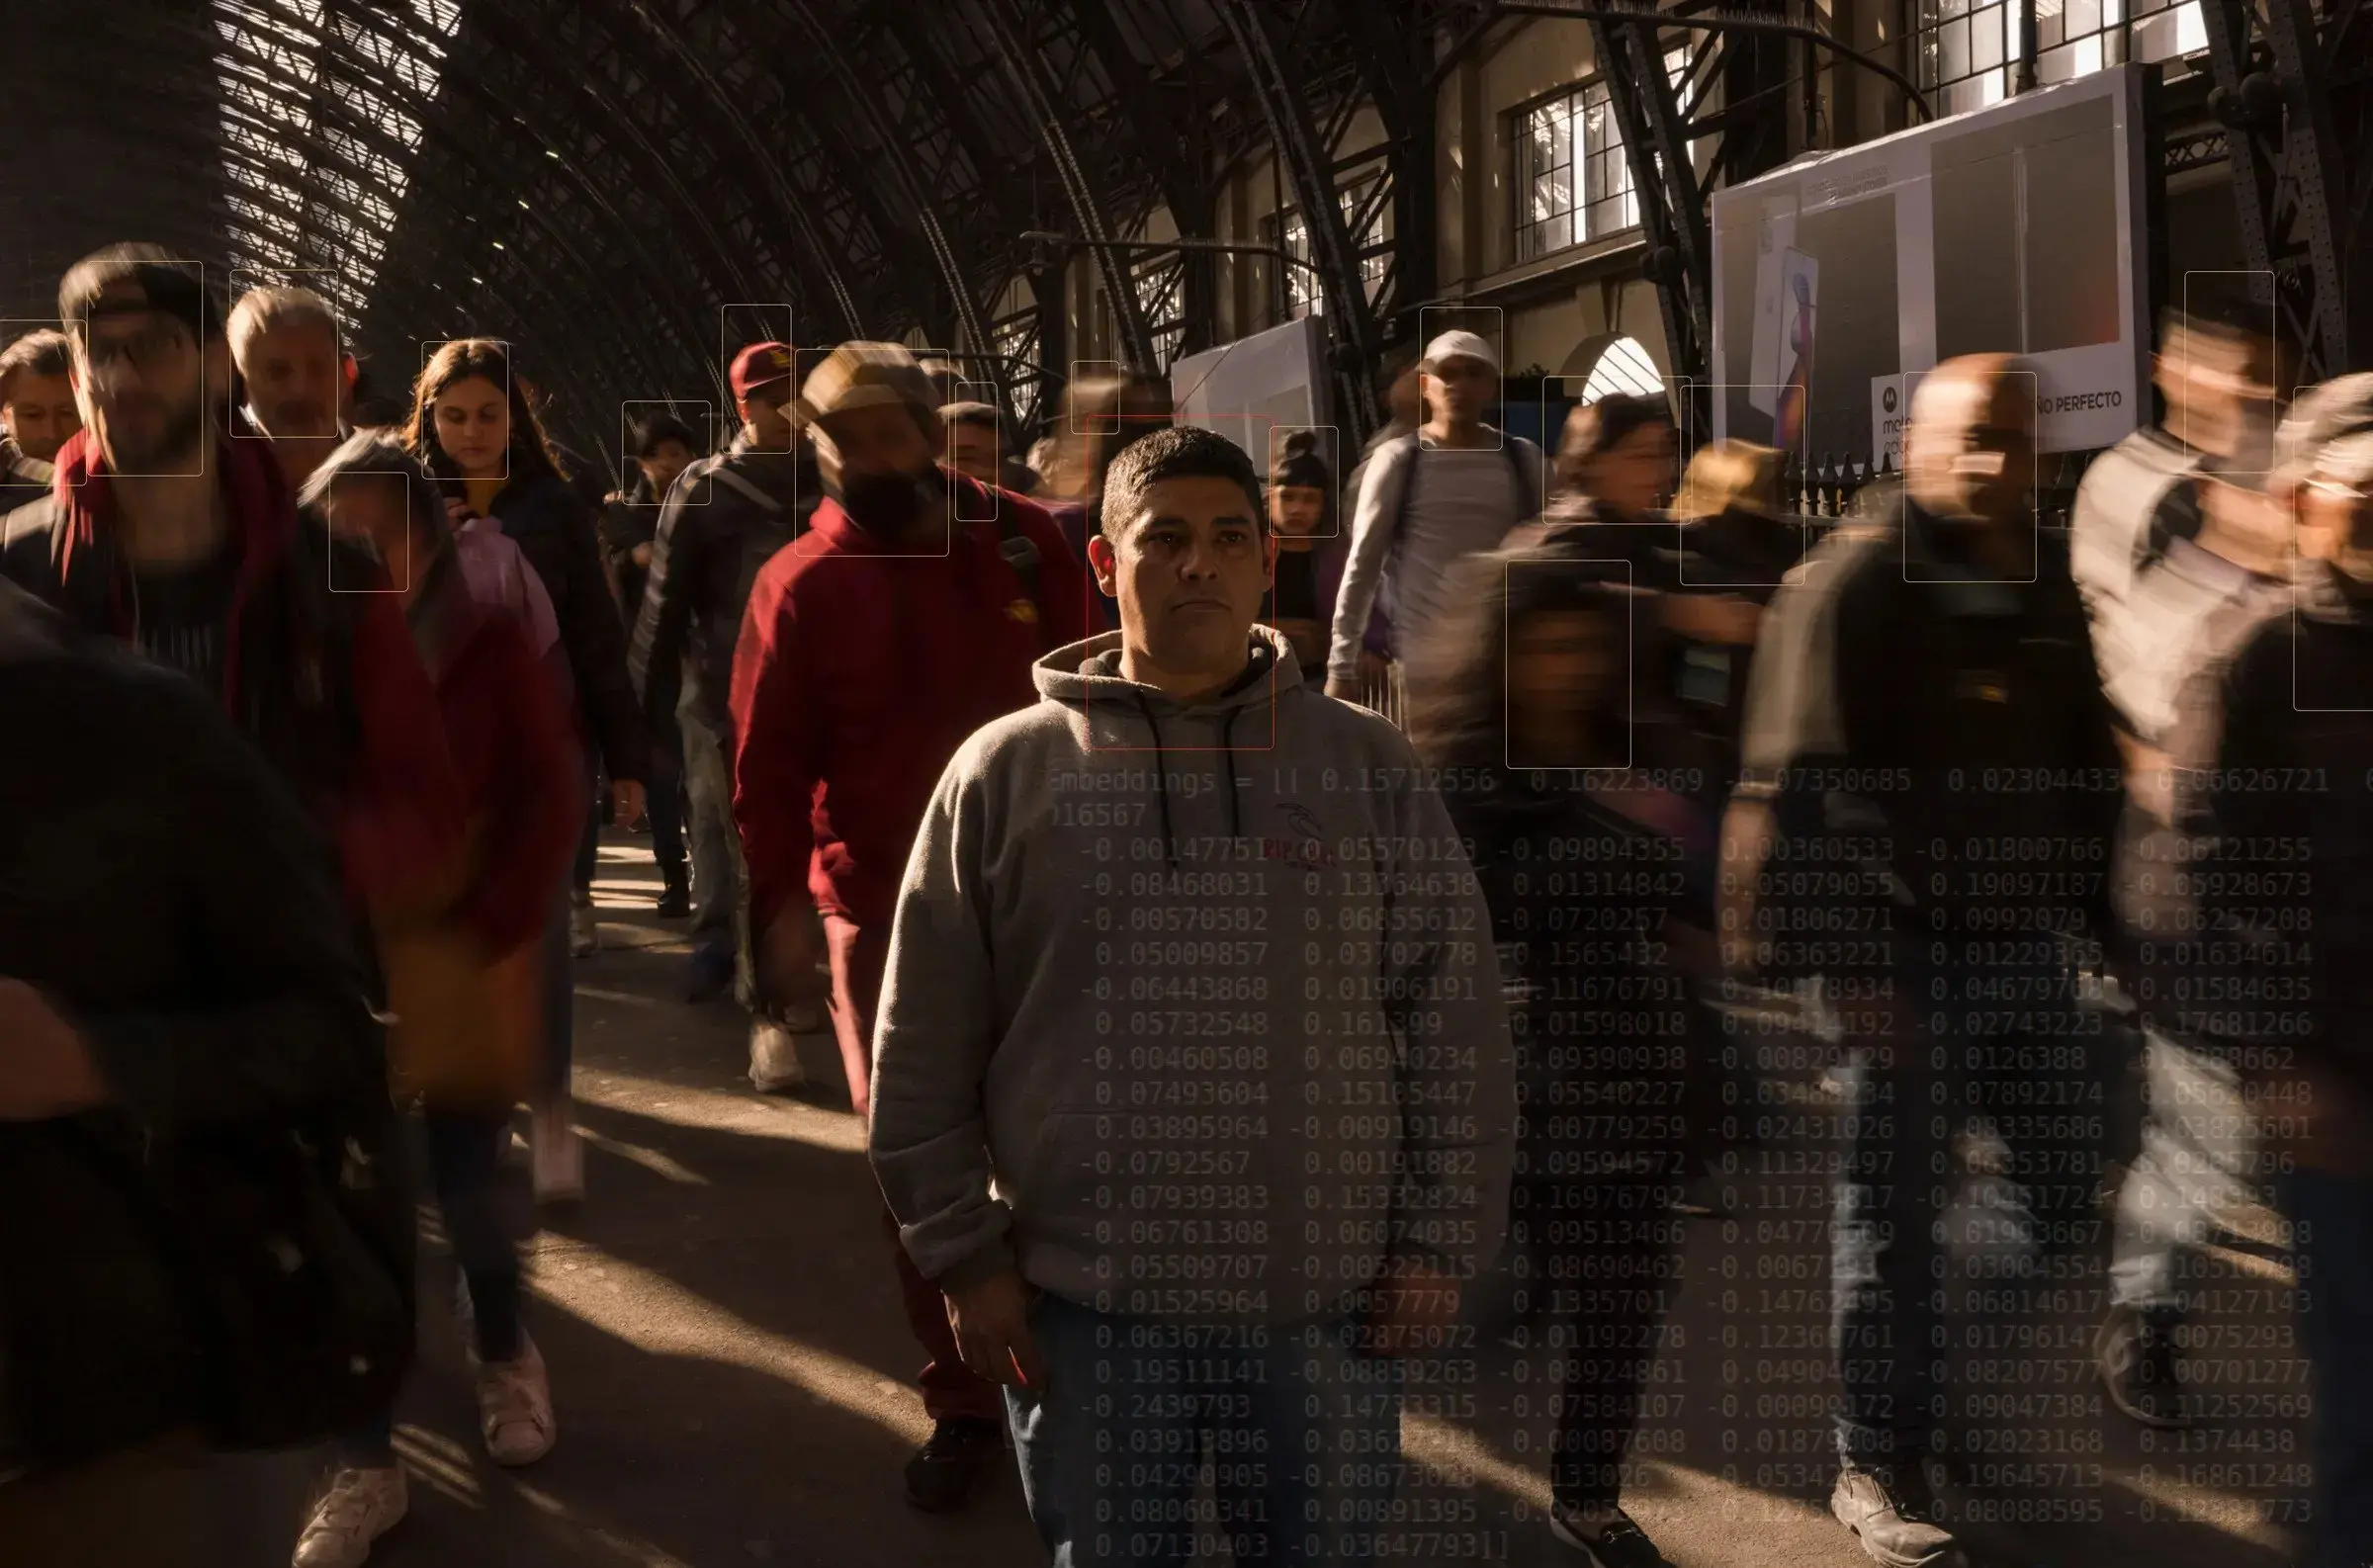 People stand in a crowd. Subtle white boxes are around their faces to suggest facial recognition monitoring.